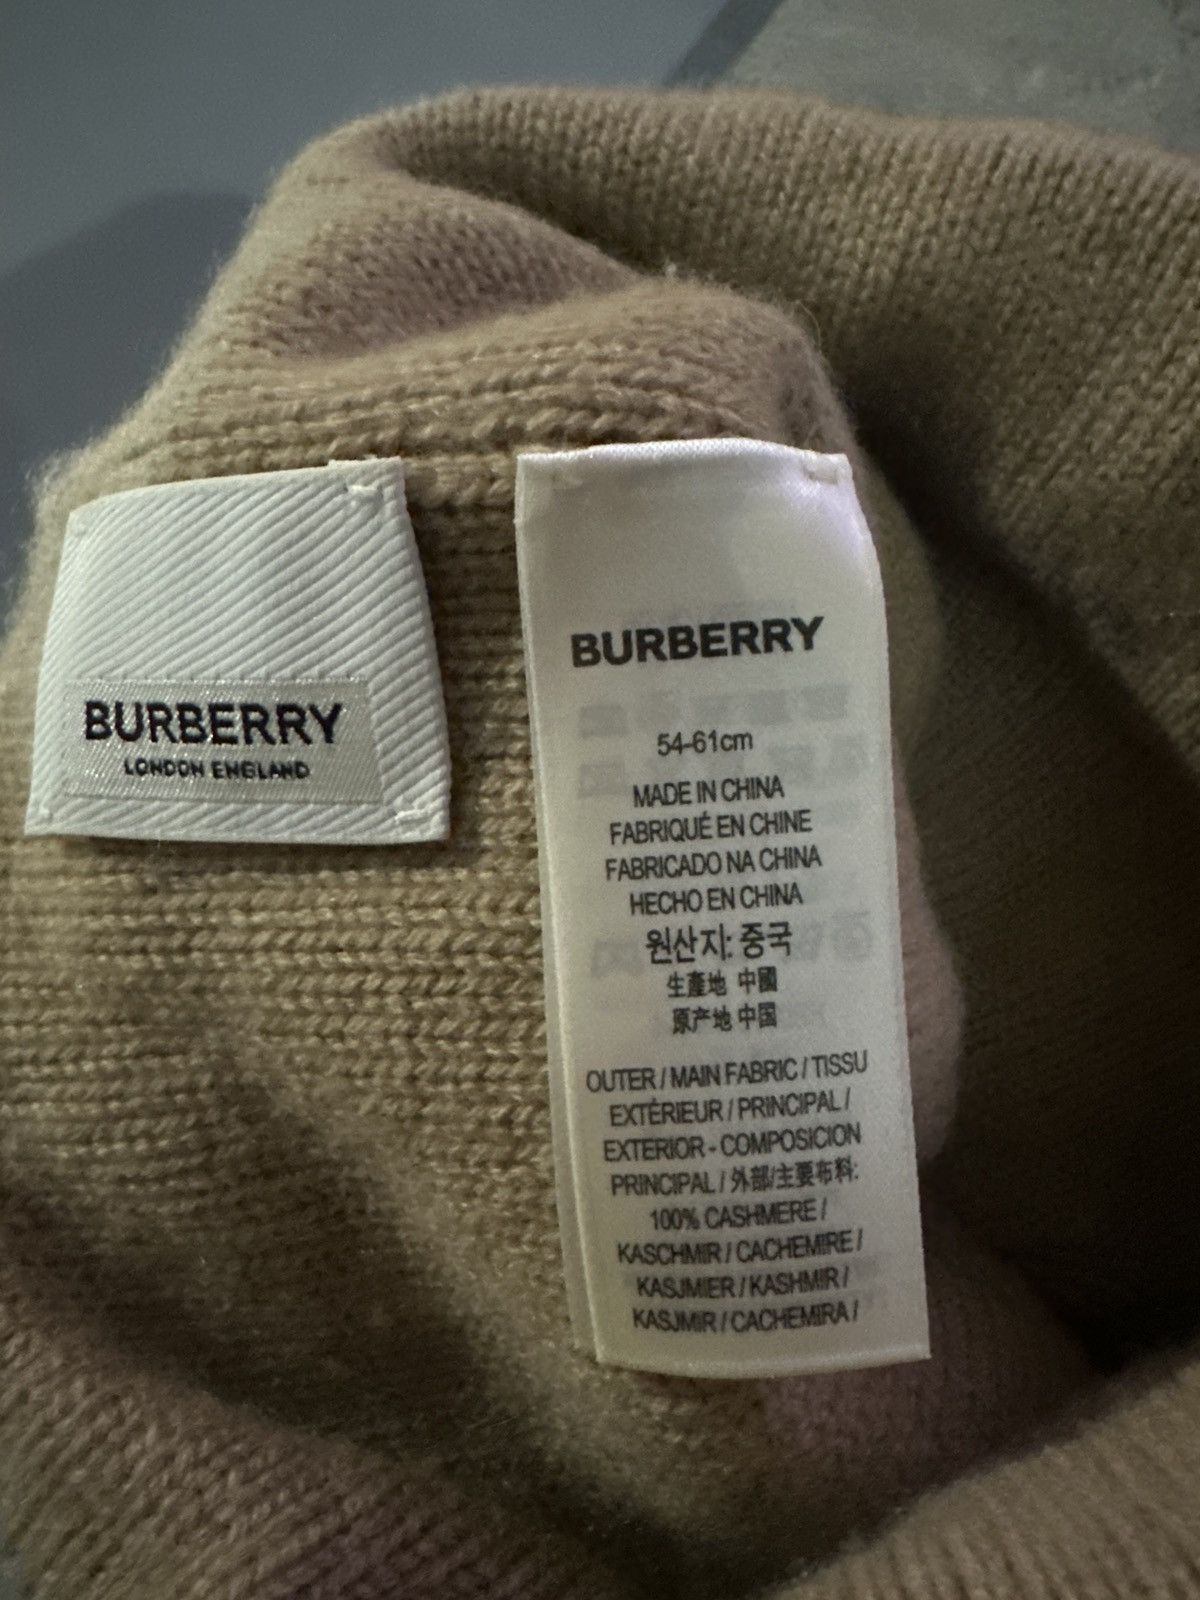 Burberry Burberry skull cap Size ONE SIZE - 2 Preview